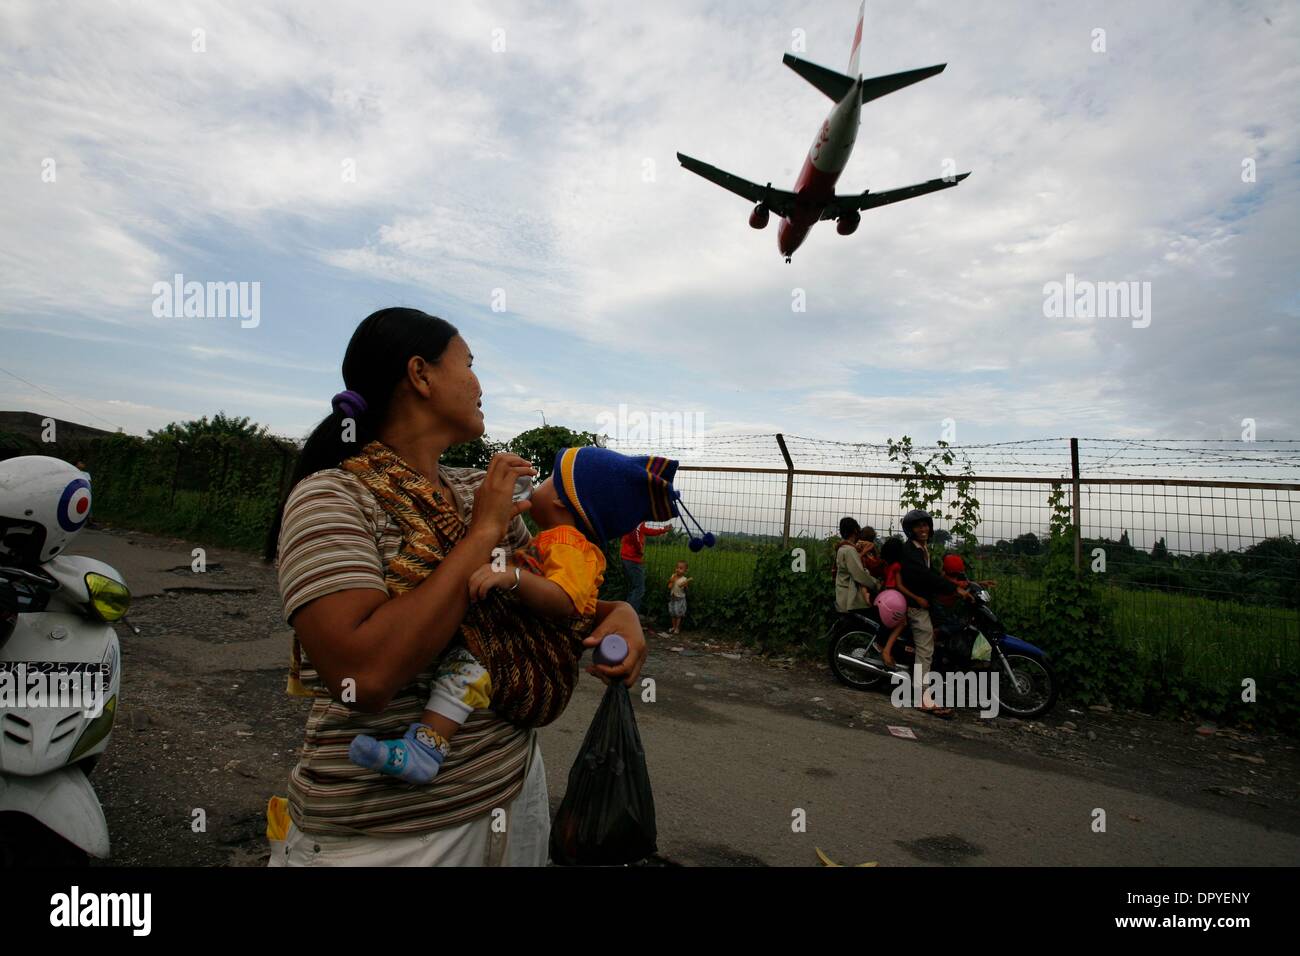 Feb 24, 2009 - Medan, North Sumatra, Indonesia - Visitors watching a commercial aeroplane crossed the airport border to landing on Medan, North Sumatra, Indonesia. Every afternoon, since the aeroplane crash on 2005 at this spot, hundreds people gathering to enjoying take off â€“ landing view of aeroplane of Medan Polonia Airport. Even risking their life, this view still amazed them Stock Photo